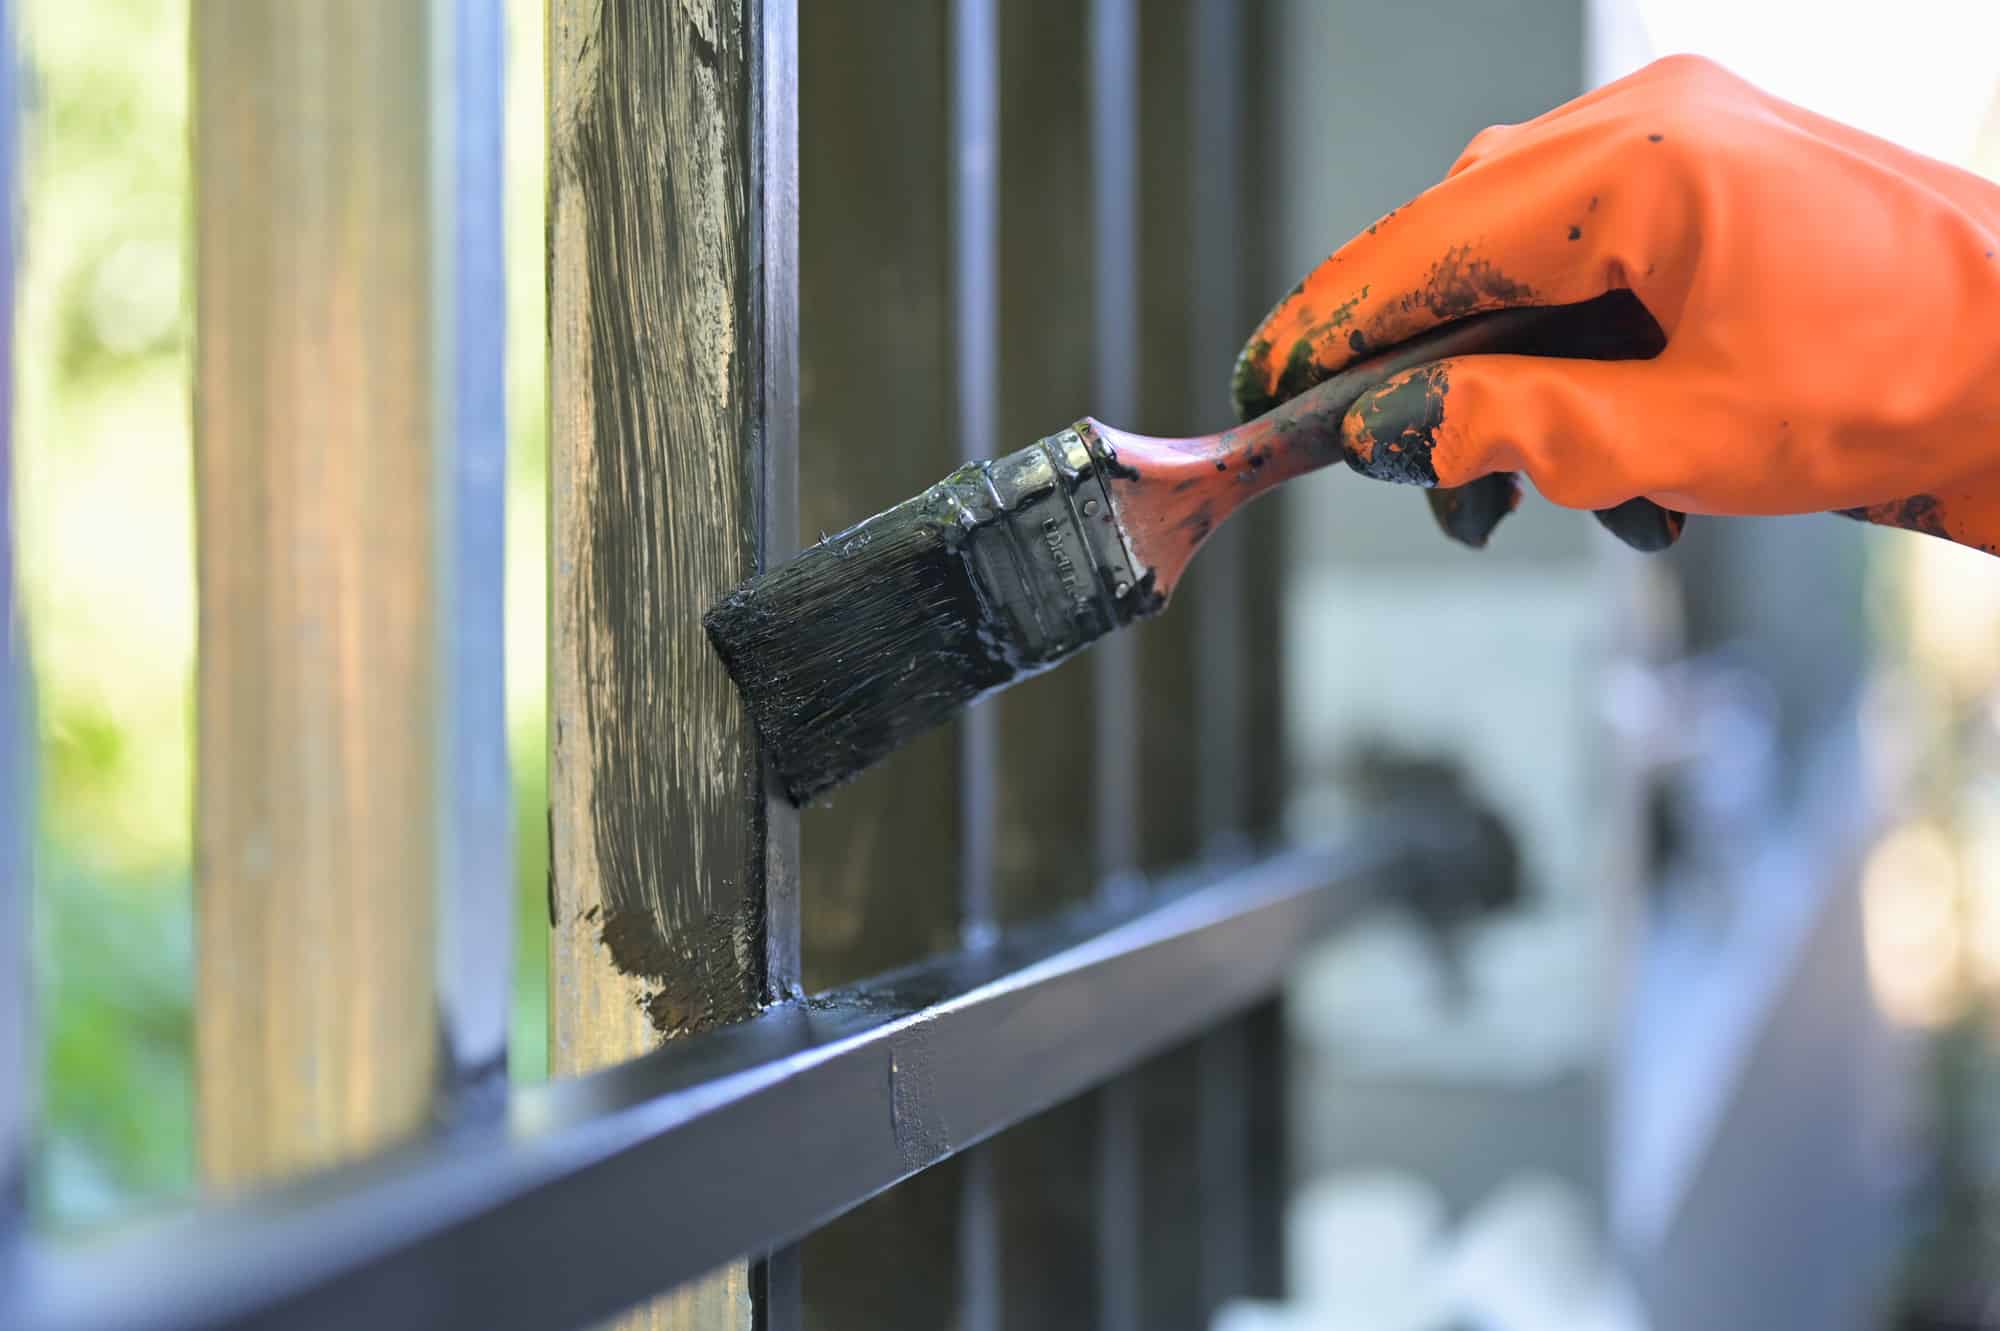 painting the steel gate using a paint brush